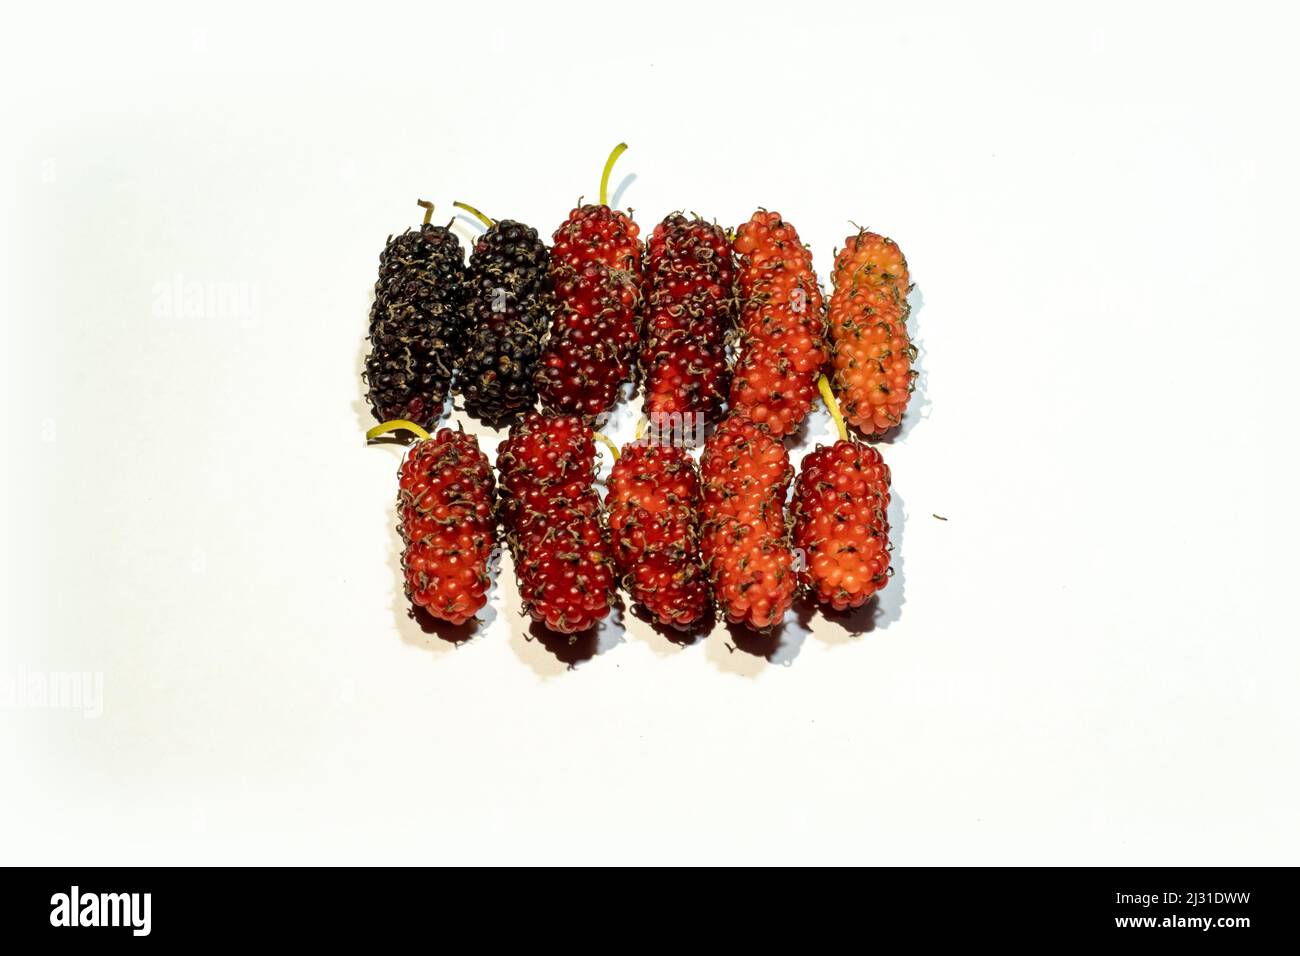 Morus alba or mulberries on white background. Black mulberries are the fruit of a small spreading tree. Superficially, black mulberries look like dark Stock Photo